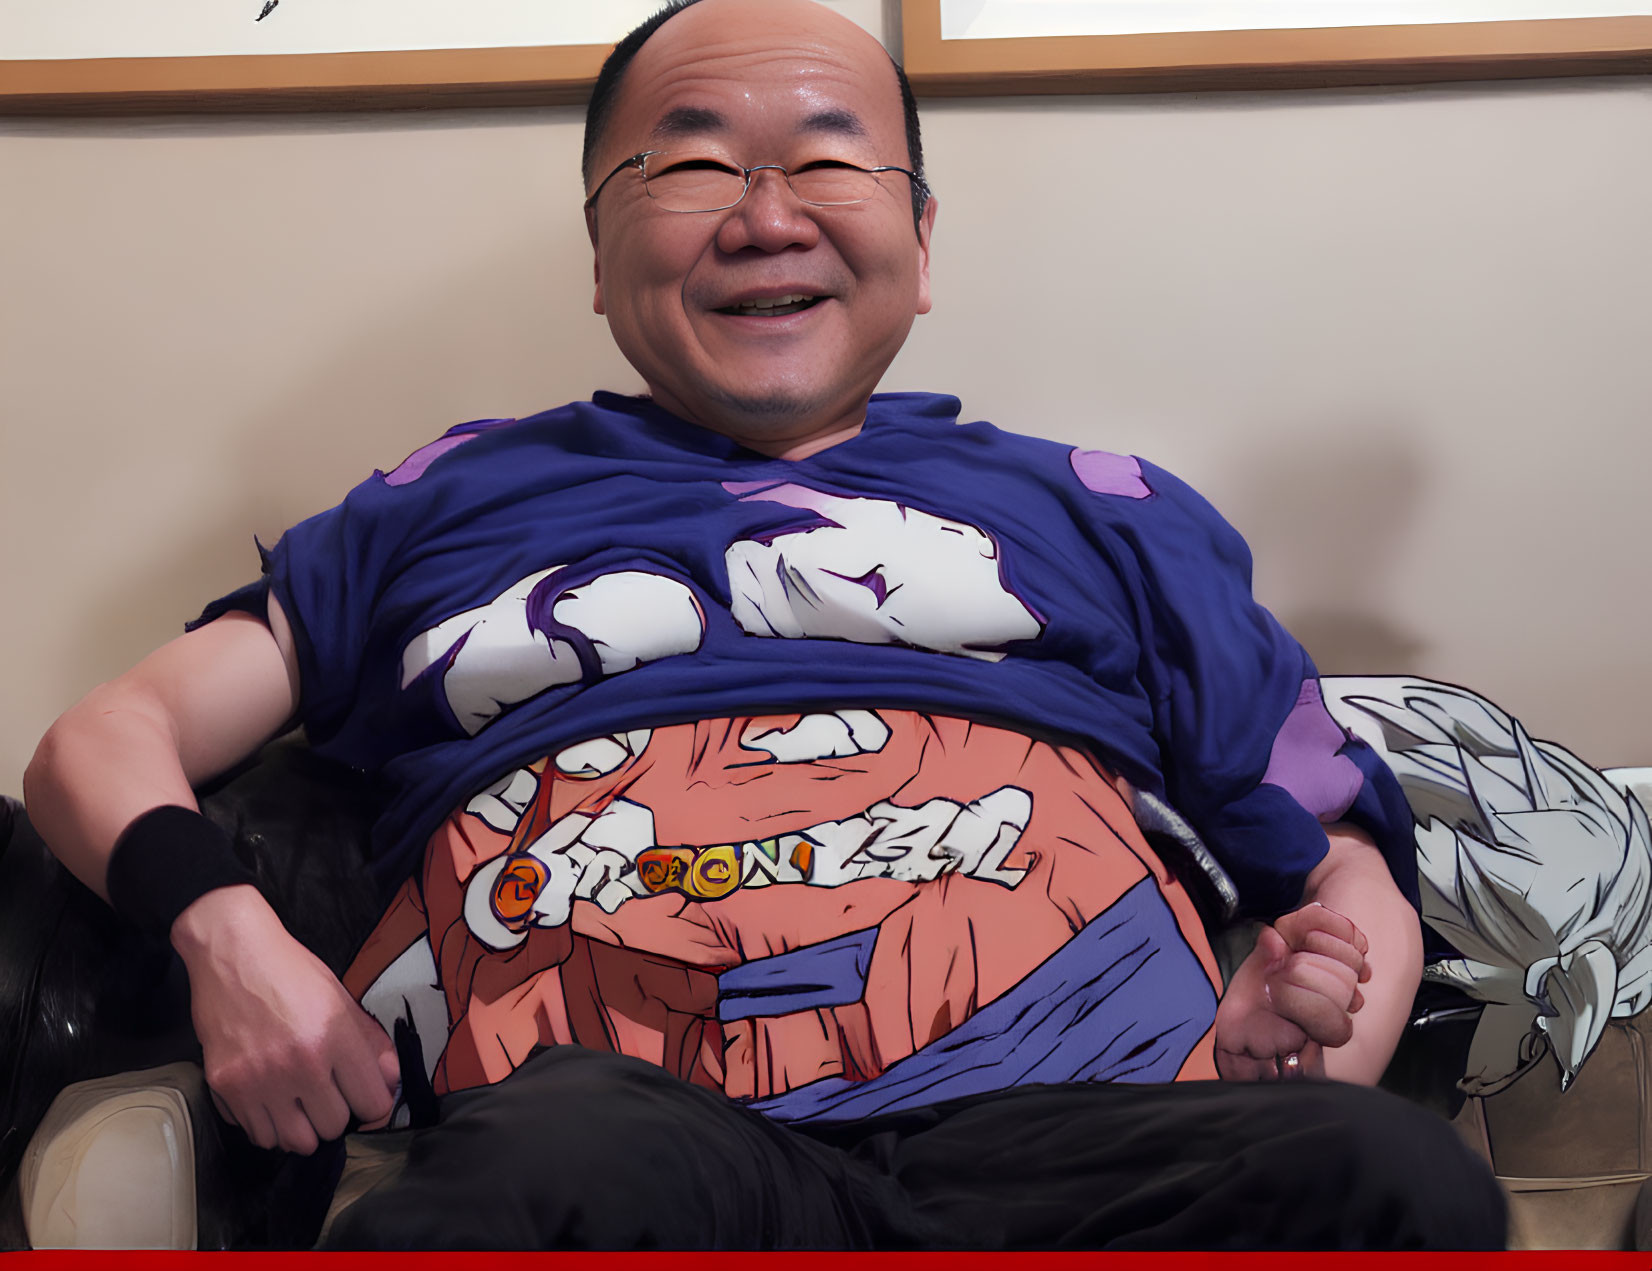 Smiling person in Dragon Ball Z Goku t-shirt on couch with artwork